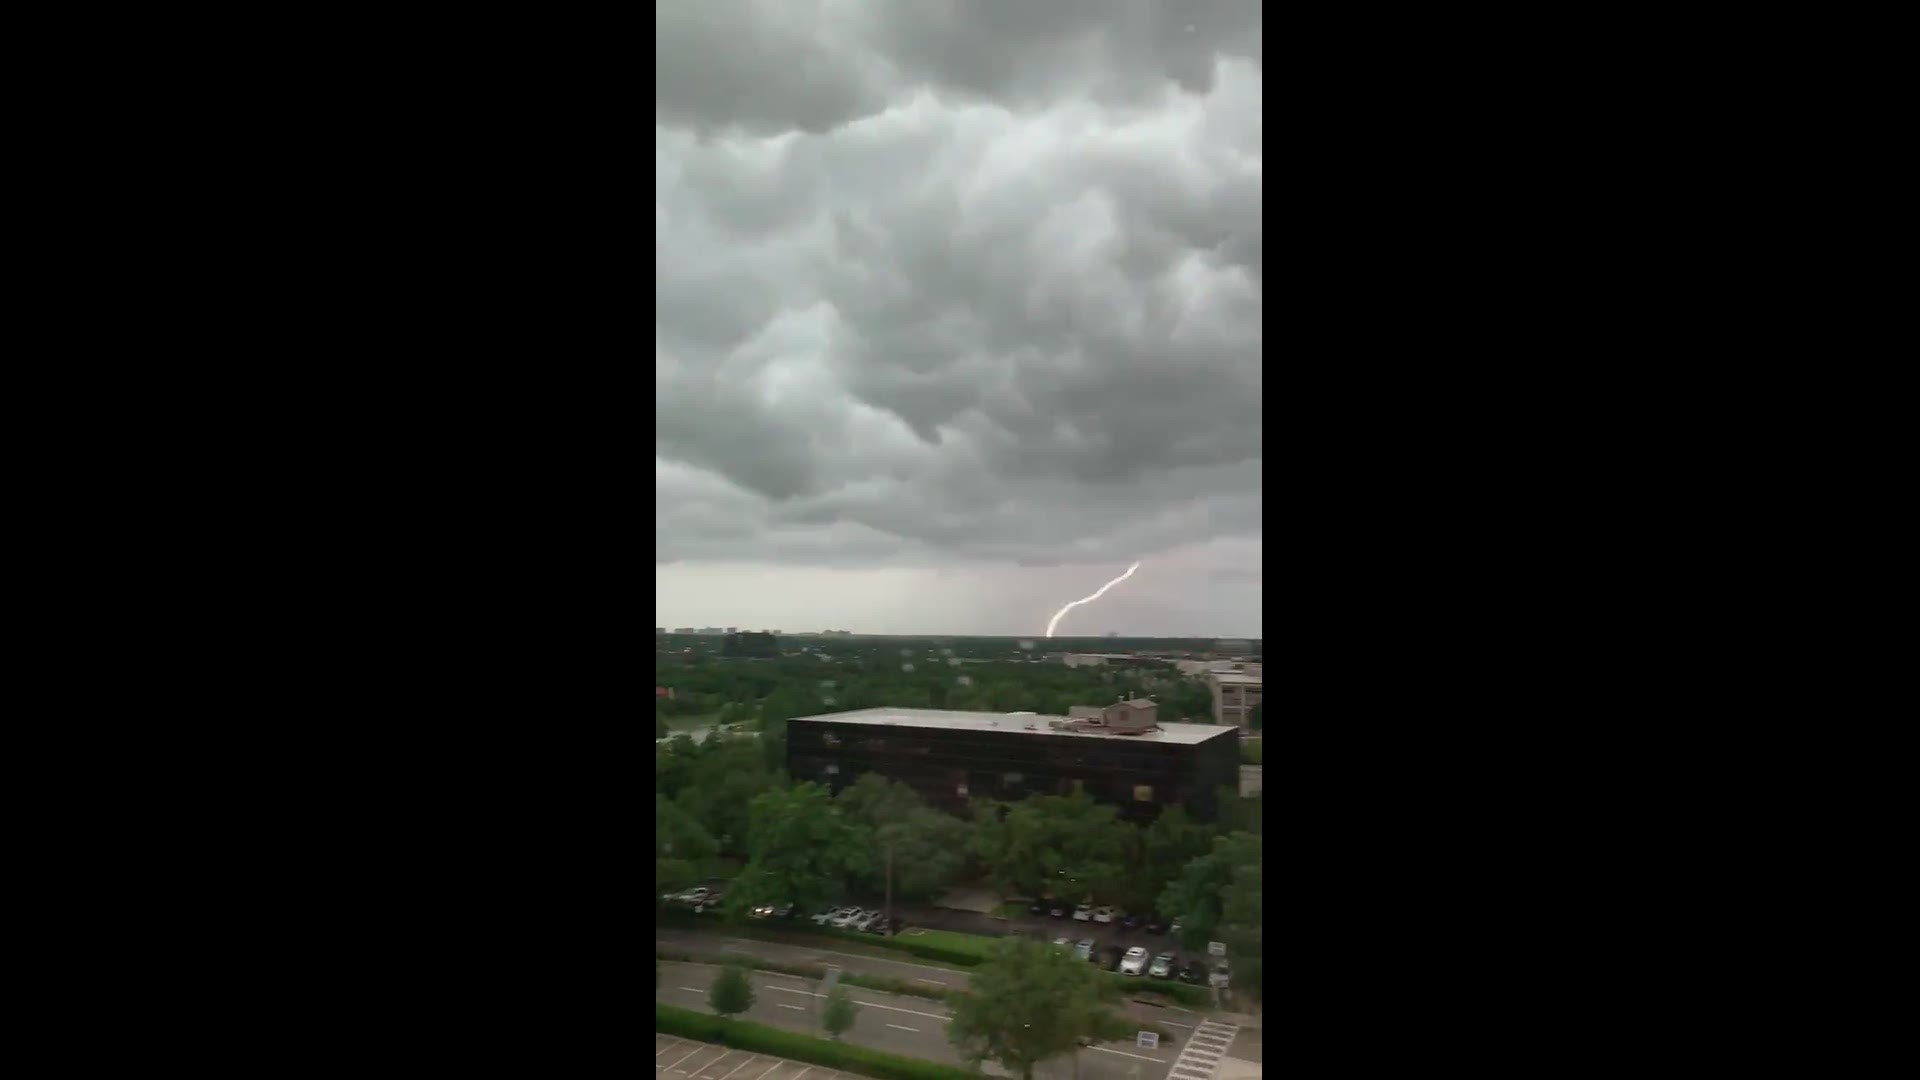 View from Fetal Care Center at Medical City Dallas of lightning
Credit: Kevin